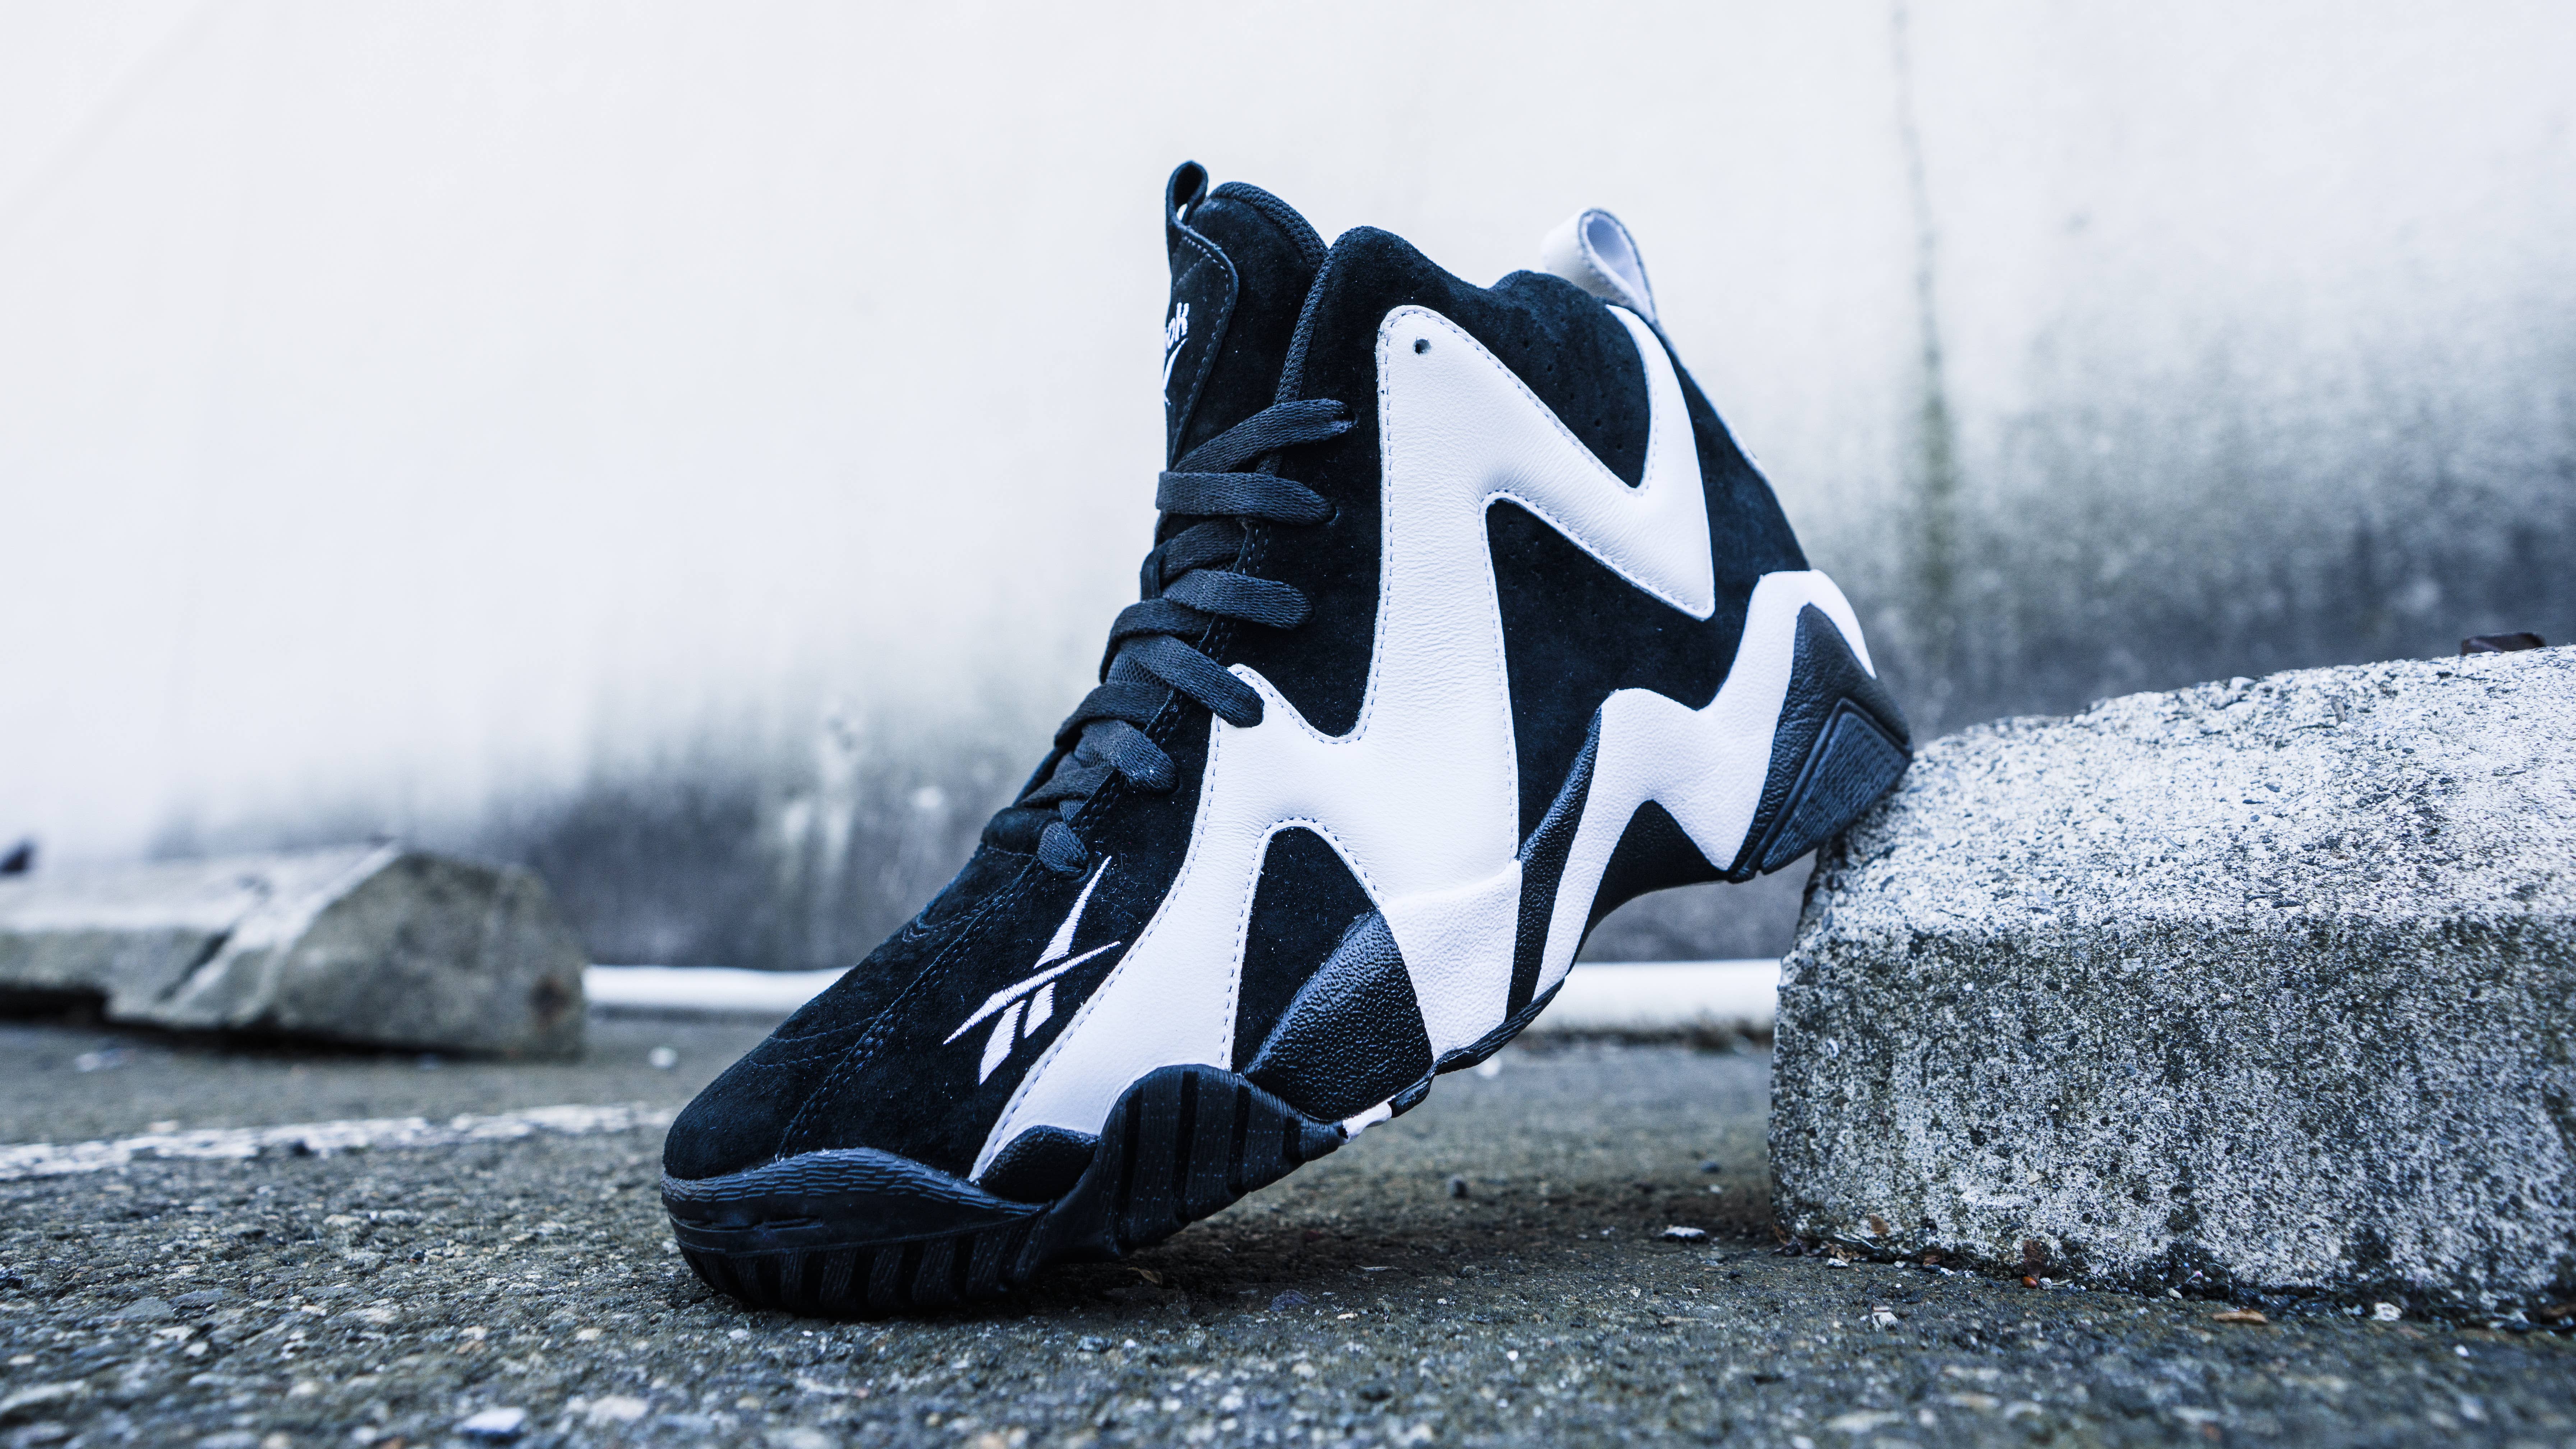 Reebok Kamikaze Sneaker in Order to Be 'Accountable' | Complex